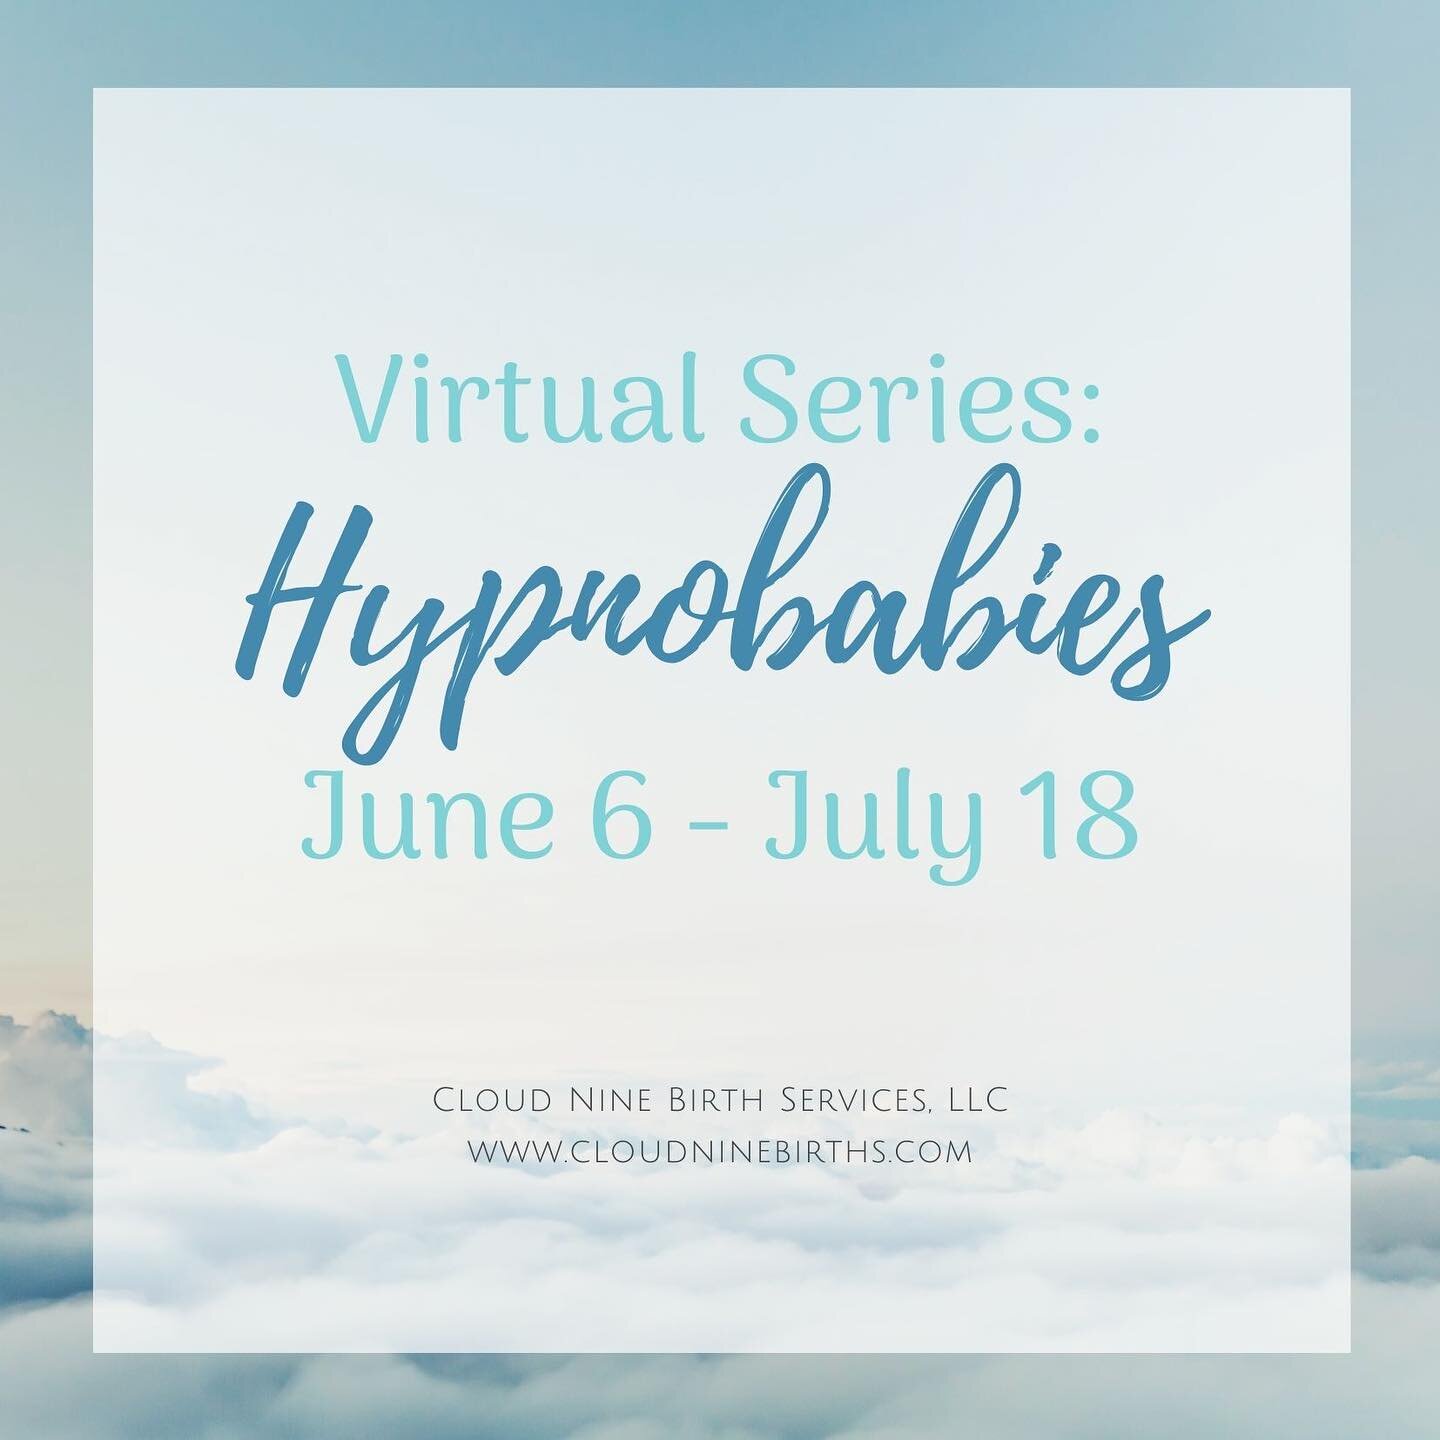 The lovely Kelly Locke will be starting a virtual Hypnobabies&reg; course this summer!
.
You can learn more on our website or reach out get in touch with Kelly.
.
#hypnobabies #virtualclass #childbirthed #hypnosisforchildbirth